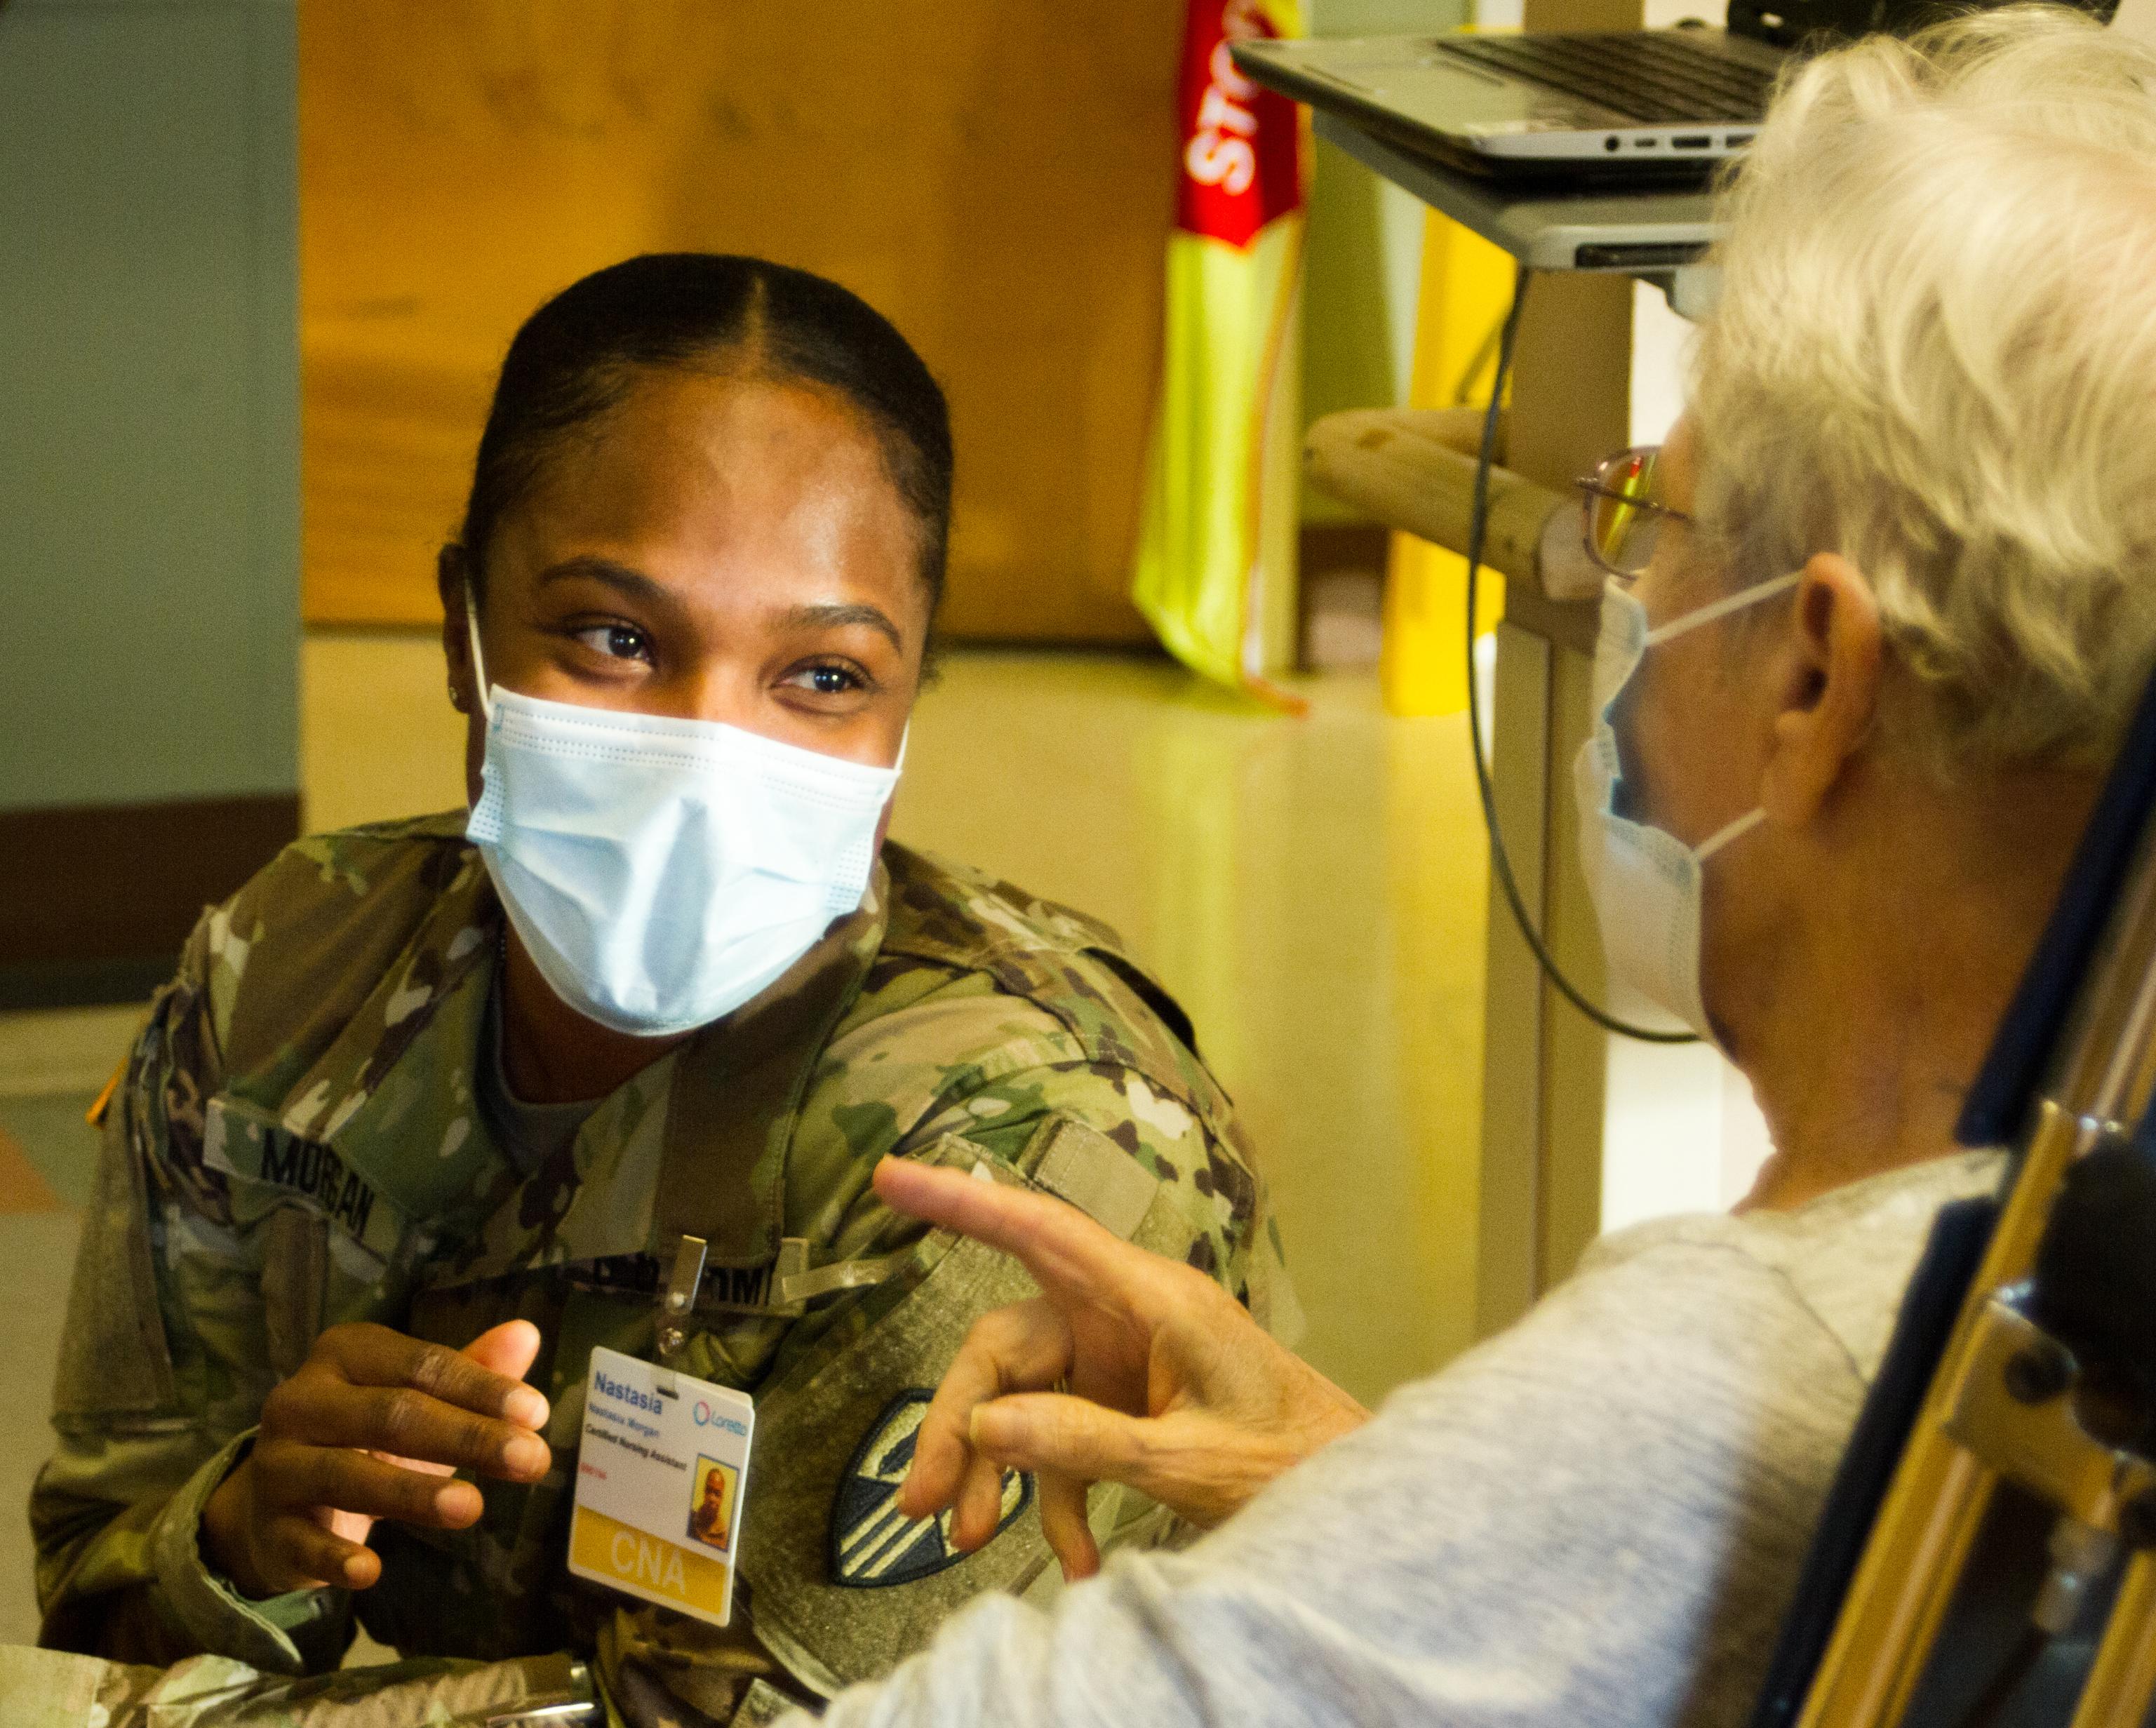 SYRACUSE--Pvt. Nastasia Morgan, a combat medic assigned to the 107th Military Police Company, 369th Sustainment Brigade, sits with a resident at Loretto Health and Rehab in Syracuse, NY Dec. 20. As part of New York State's response to Covid-19, National Guard medics have been deployed in nursing homes to help alleviate congestion of the state’s healthcare system (U.S. Army photo by Staff Sgt. Alexander Rector / released).